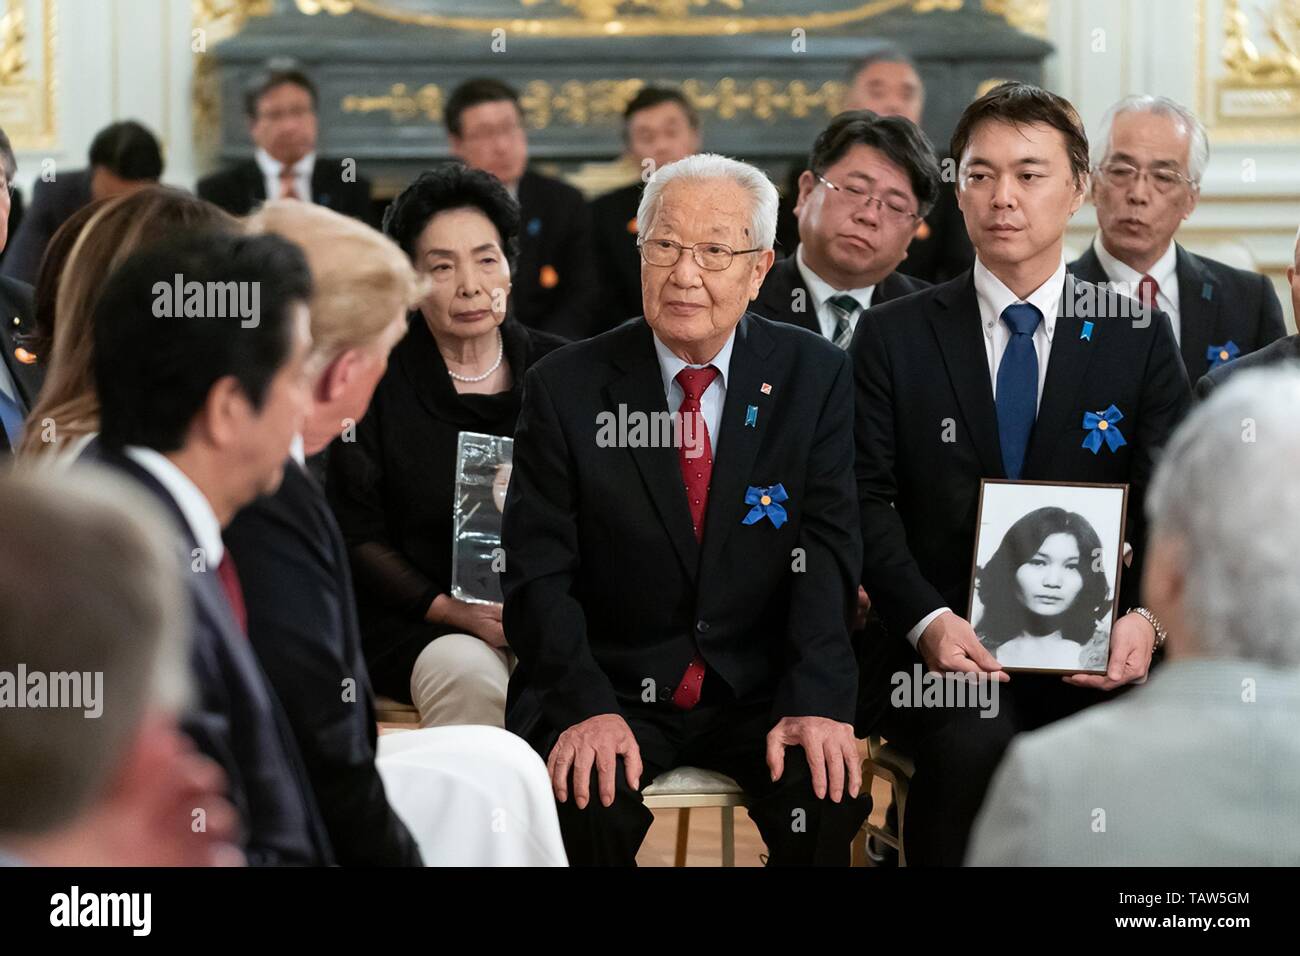 U.S. President Donald Trump and Japanese Prime Minister Shinzo Abe meet with families of those abducted by North Korea at the Akasaka Palace May 27, 2019 in Tokyo, Japan. Stock Photo